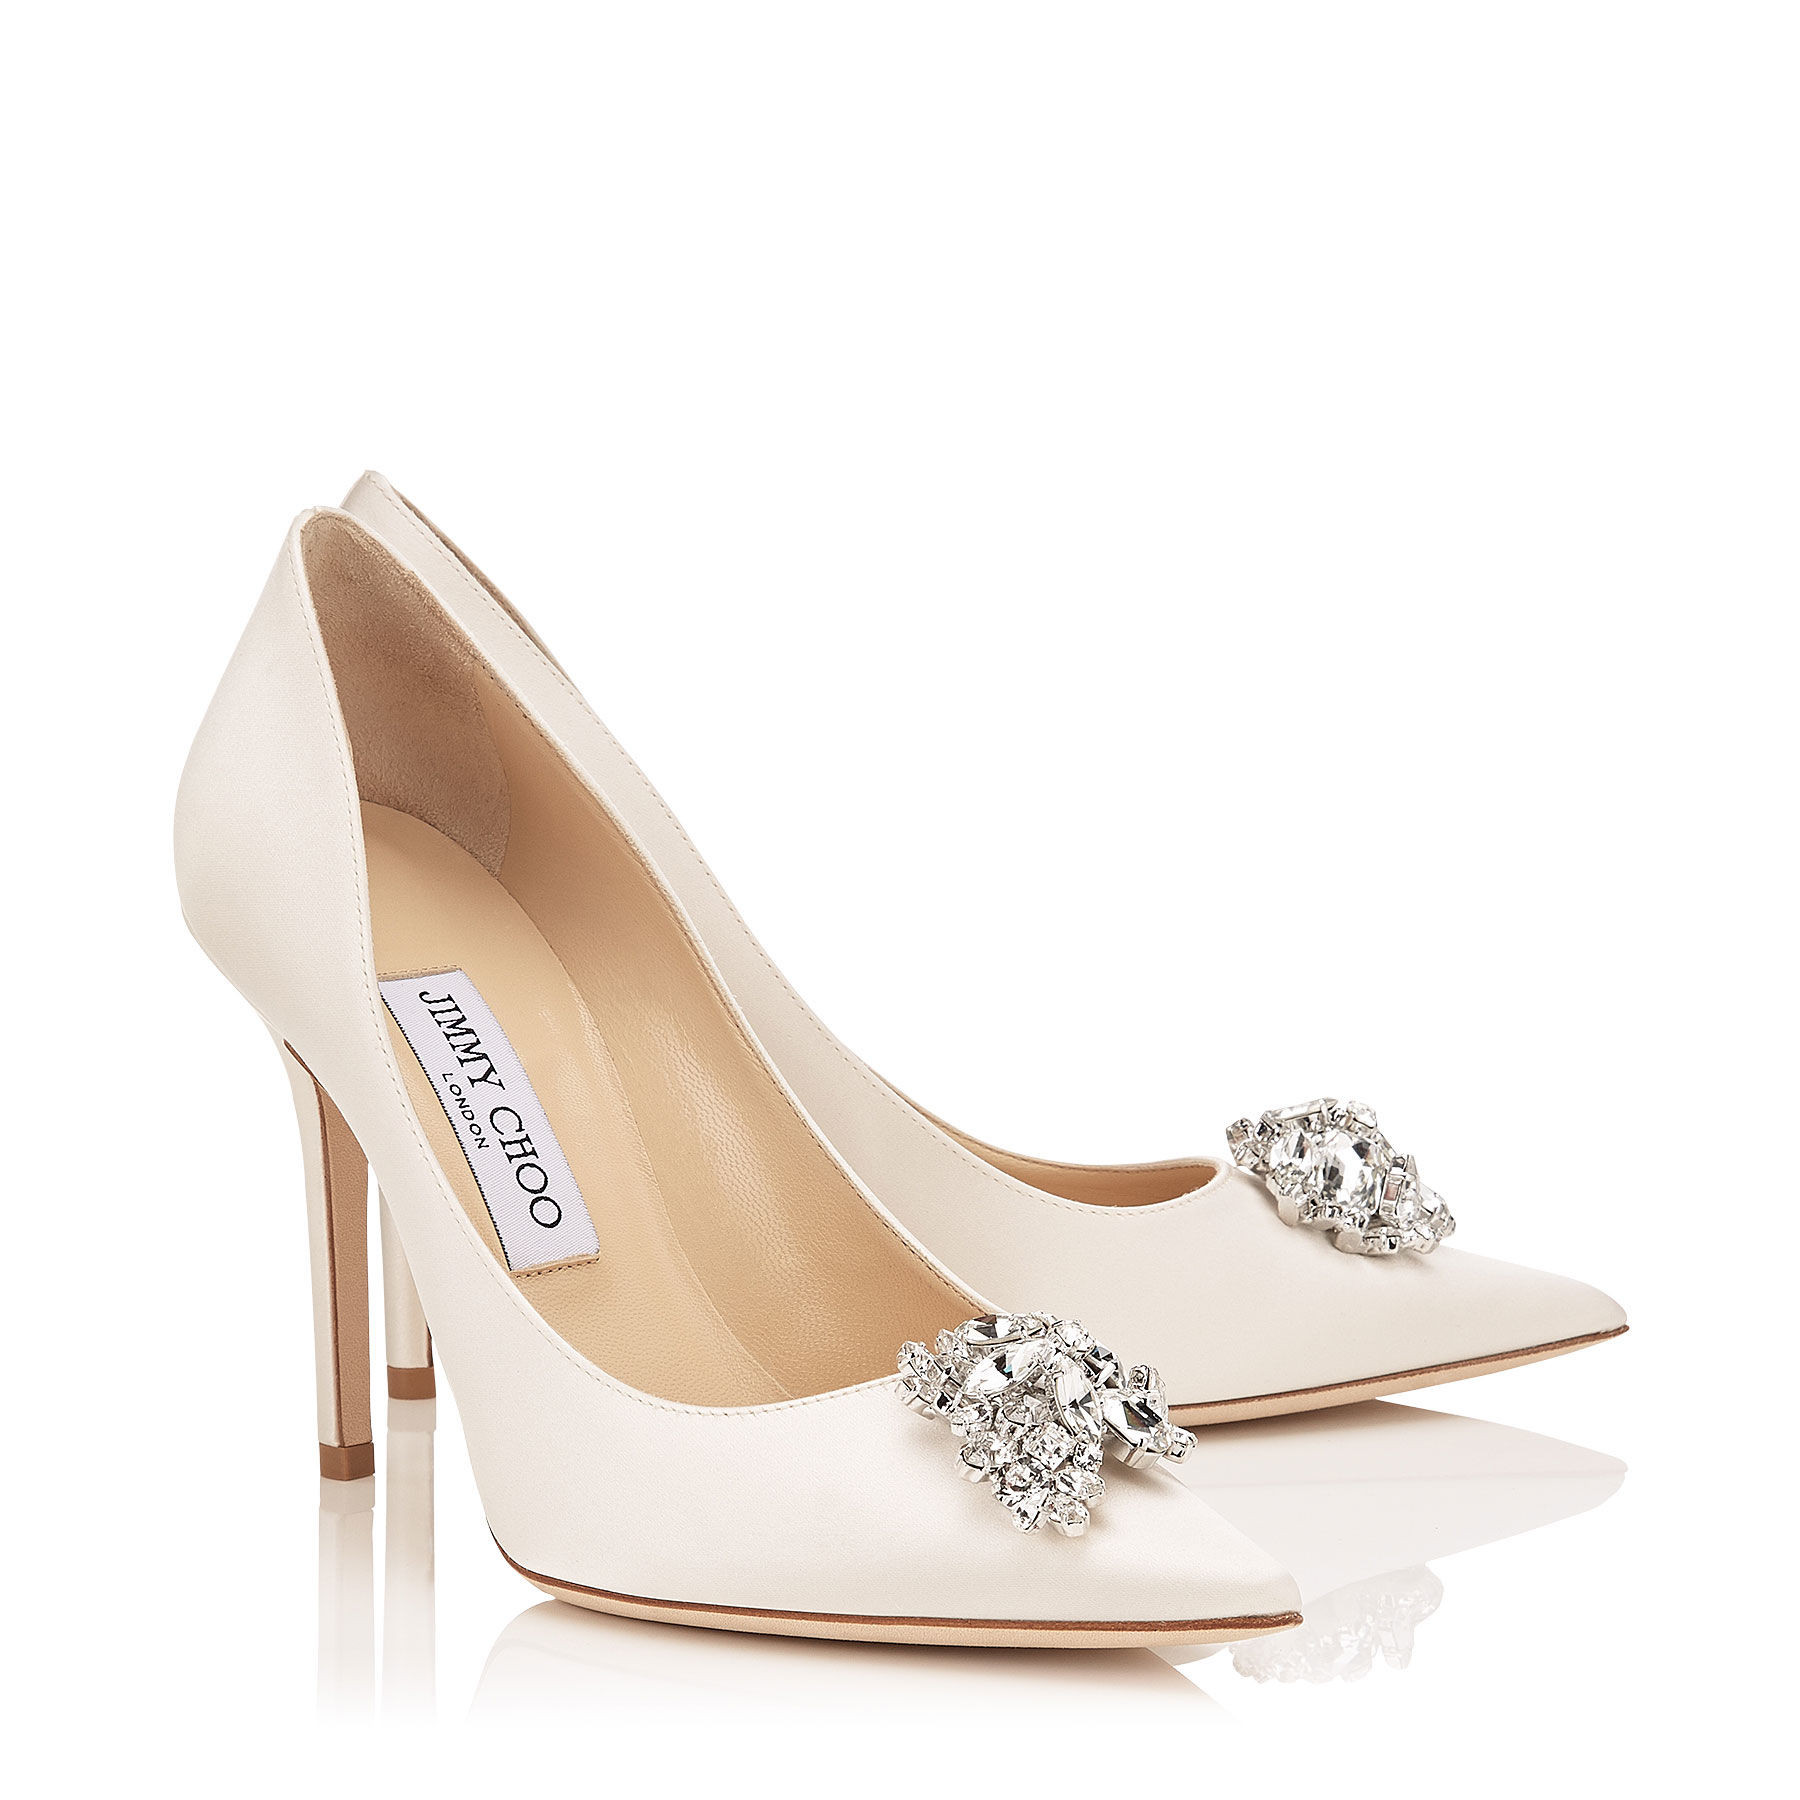 Jimmy Choo Shoes Wedding
 20 Aisle Perfect Wedding Shoes fit for a Queen Aisle Perfect